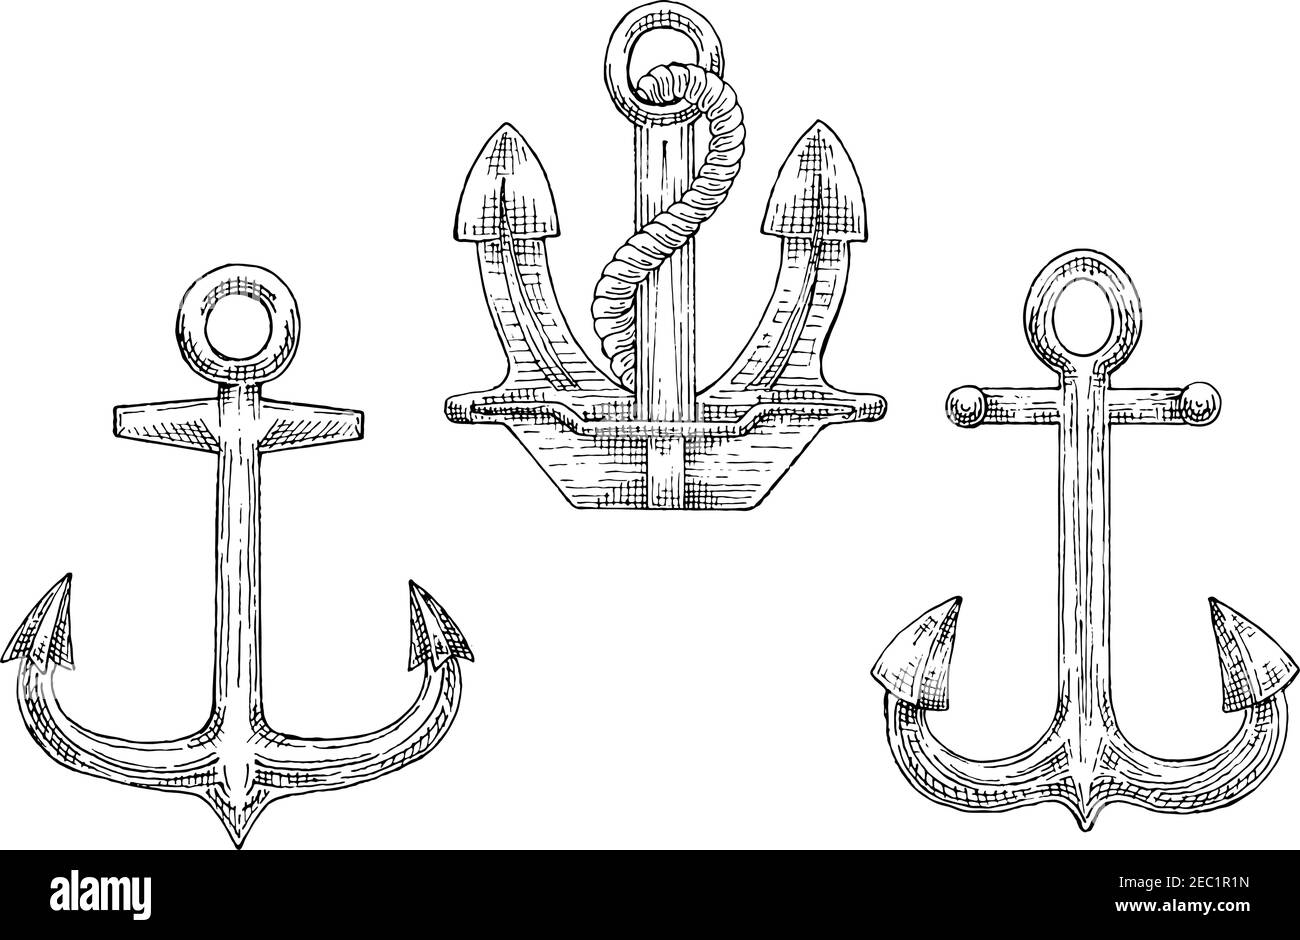 sketched navy ship anchors symbols with stockless and admiralty anchors decorated by twisted rope great for tattoo naval heraldry or marine travel 2EC1R1N